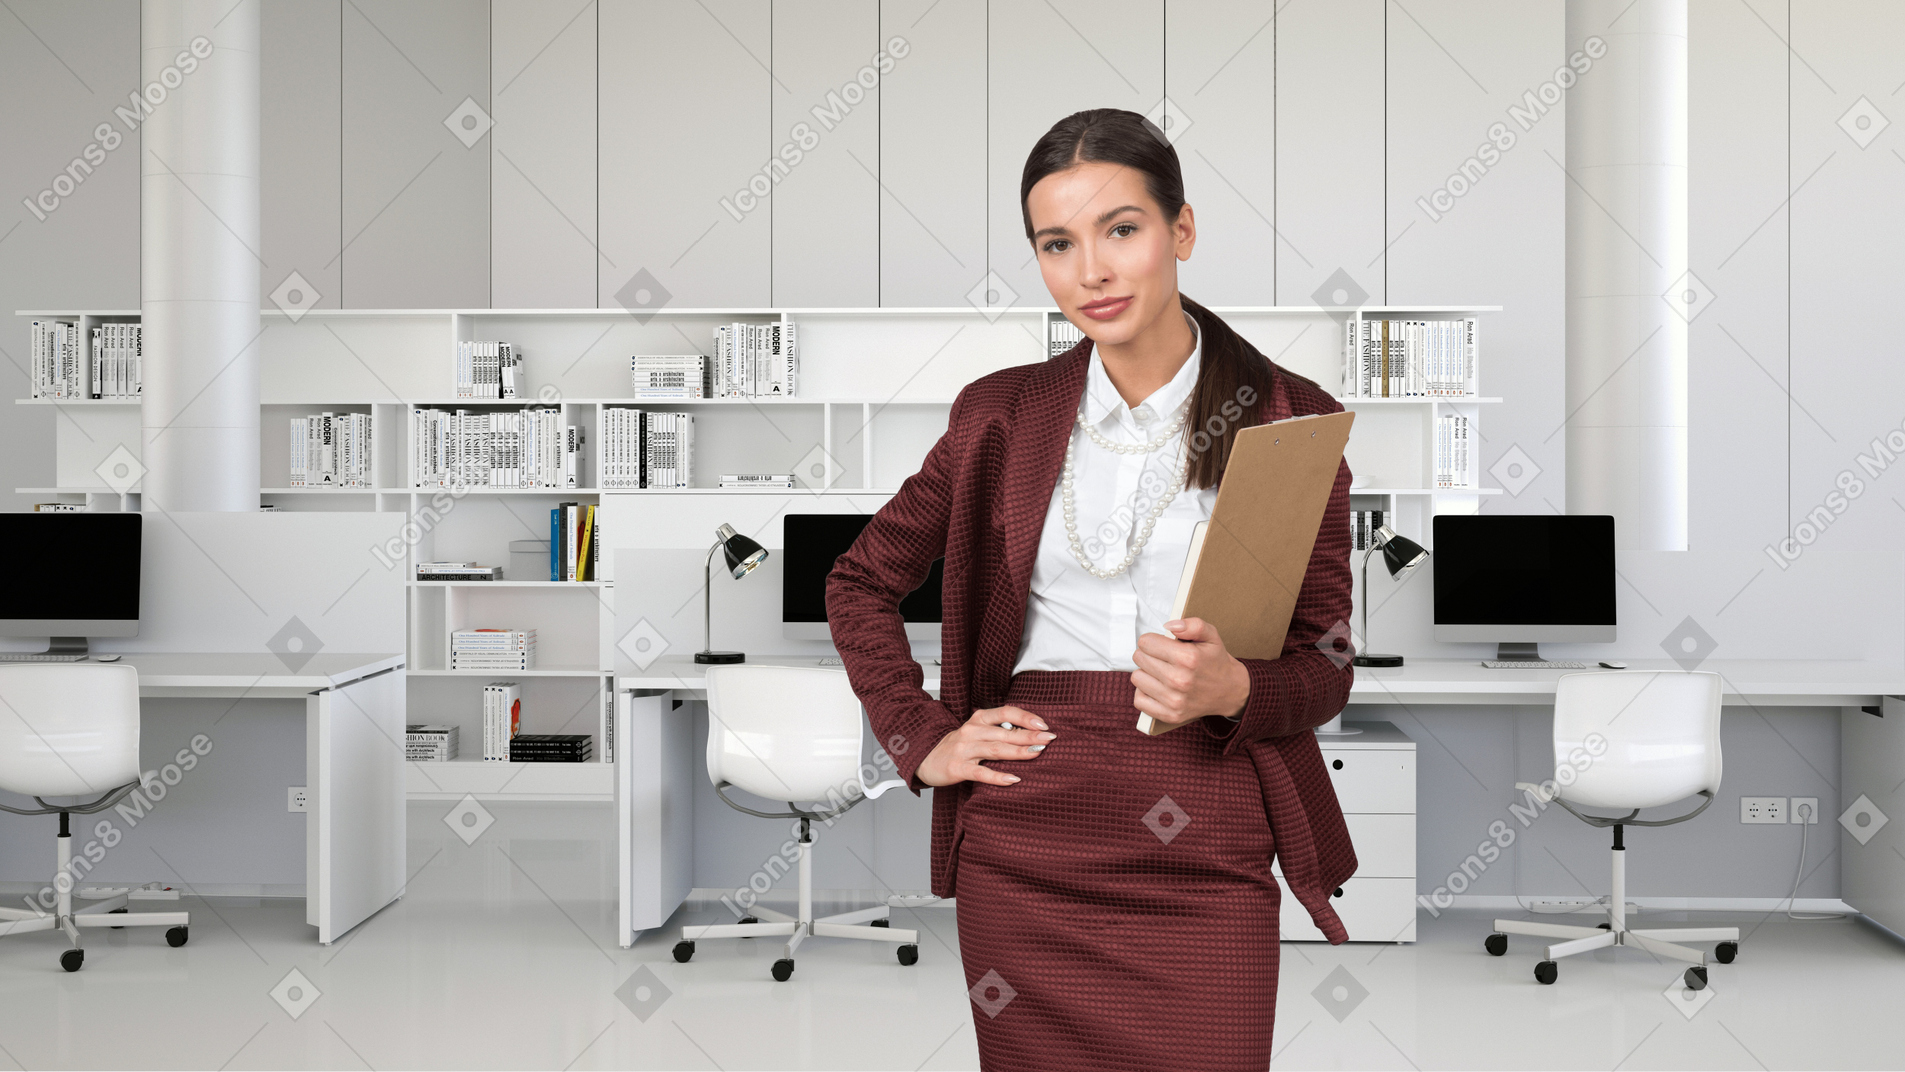 Woman with clipboard standing in the office